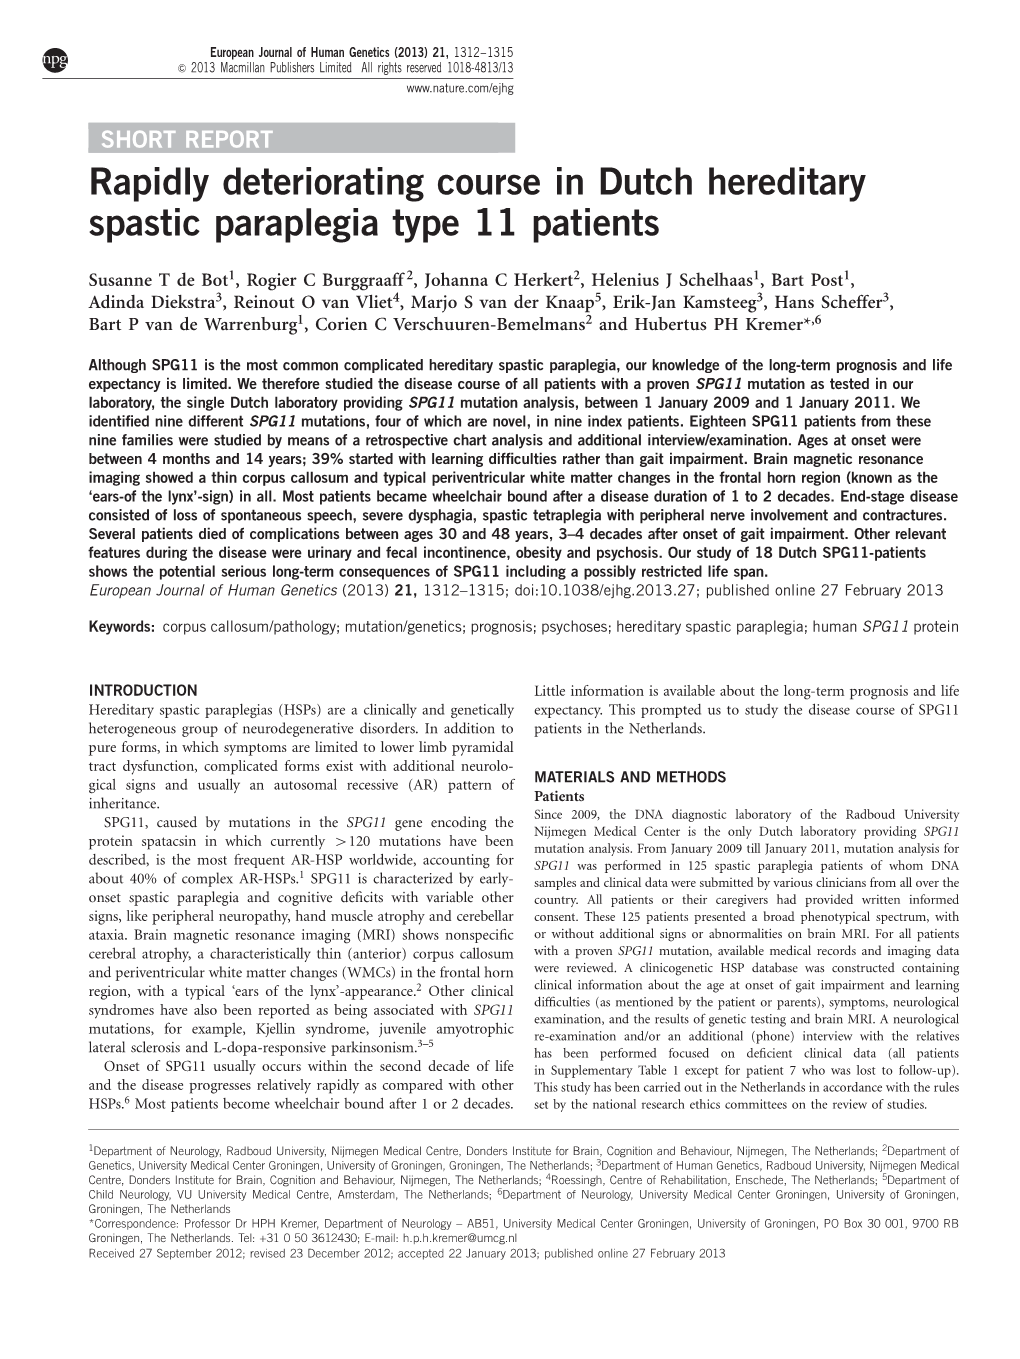 Rapidly Deteriorating Course in Dutch Hereditary Spastic Paraplegia Type 11 Patients